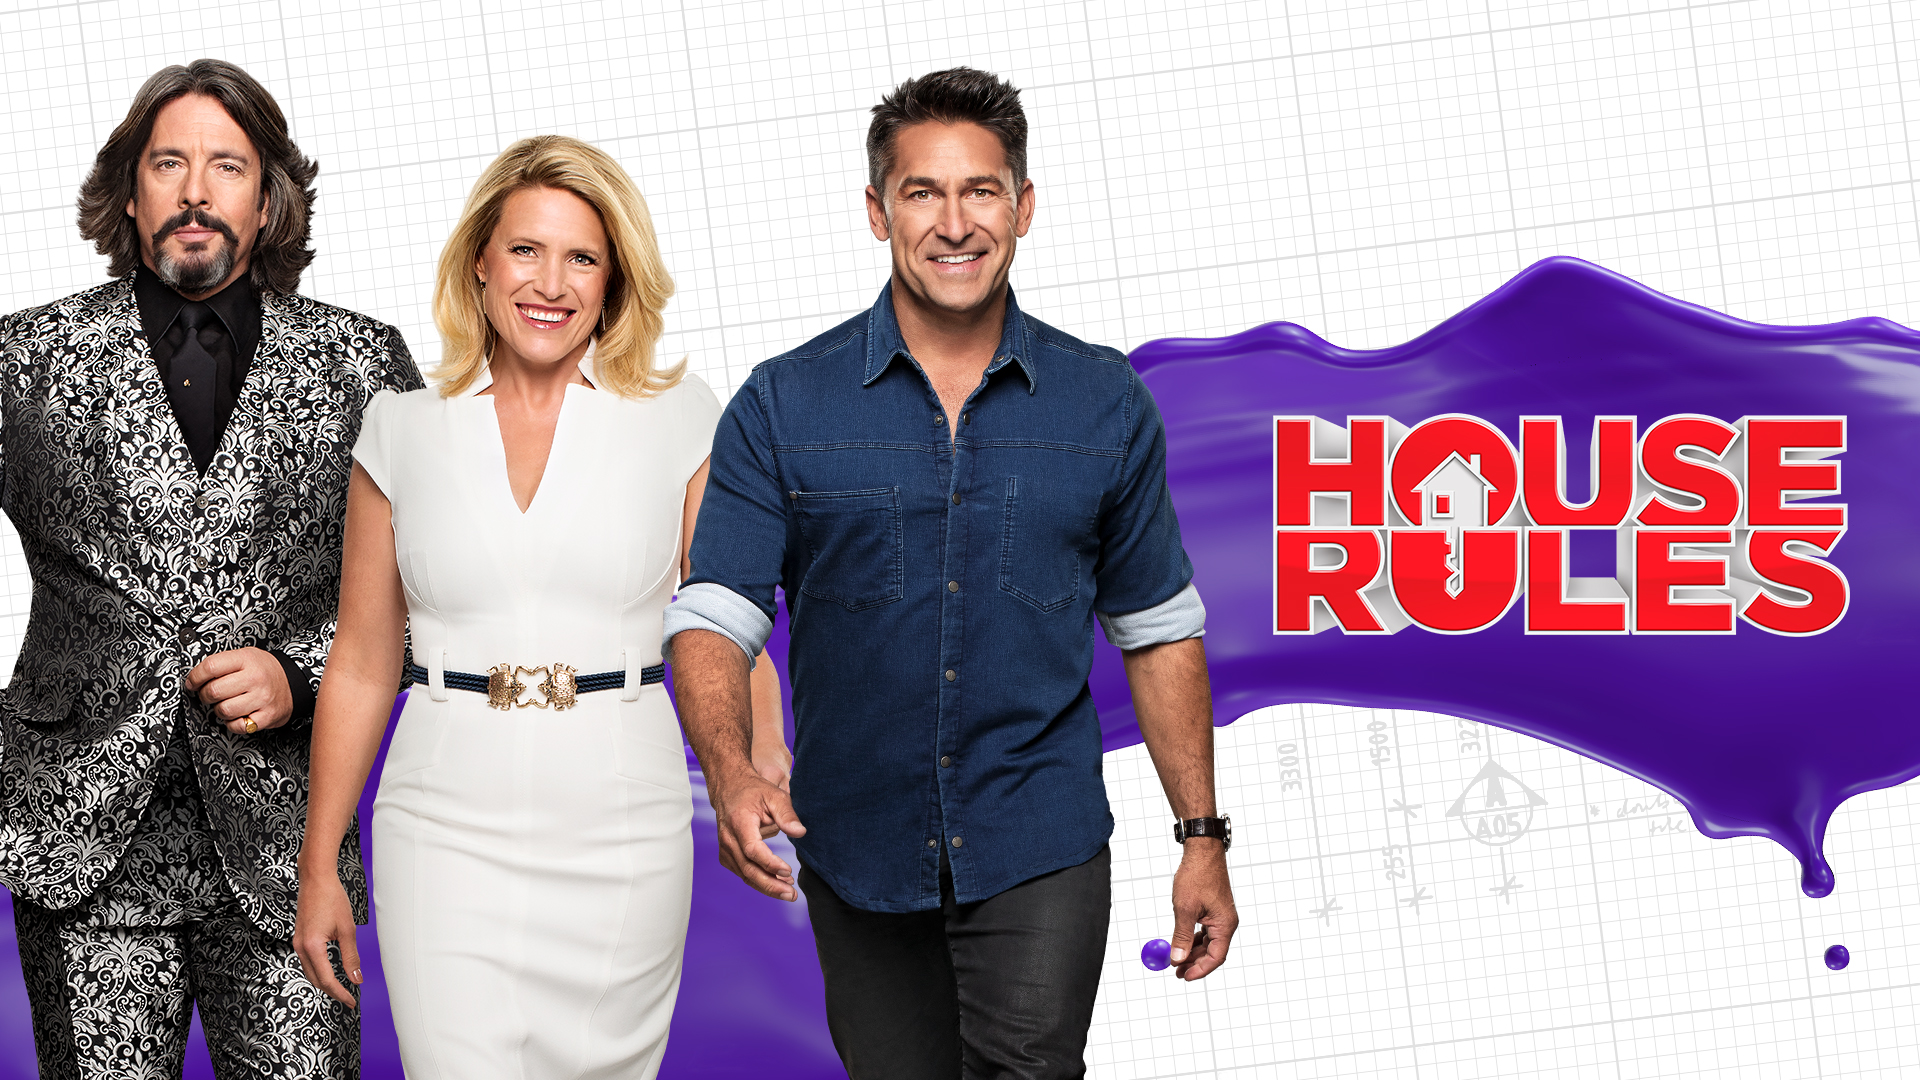  House Rules Source: Seven Network 